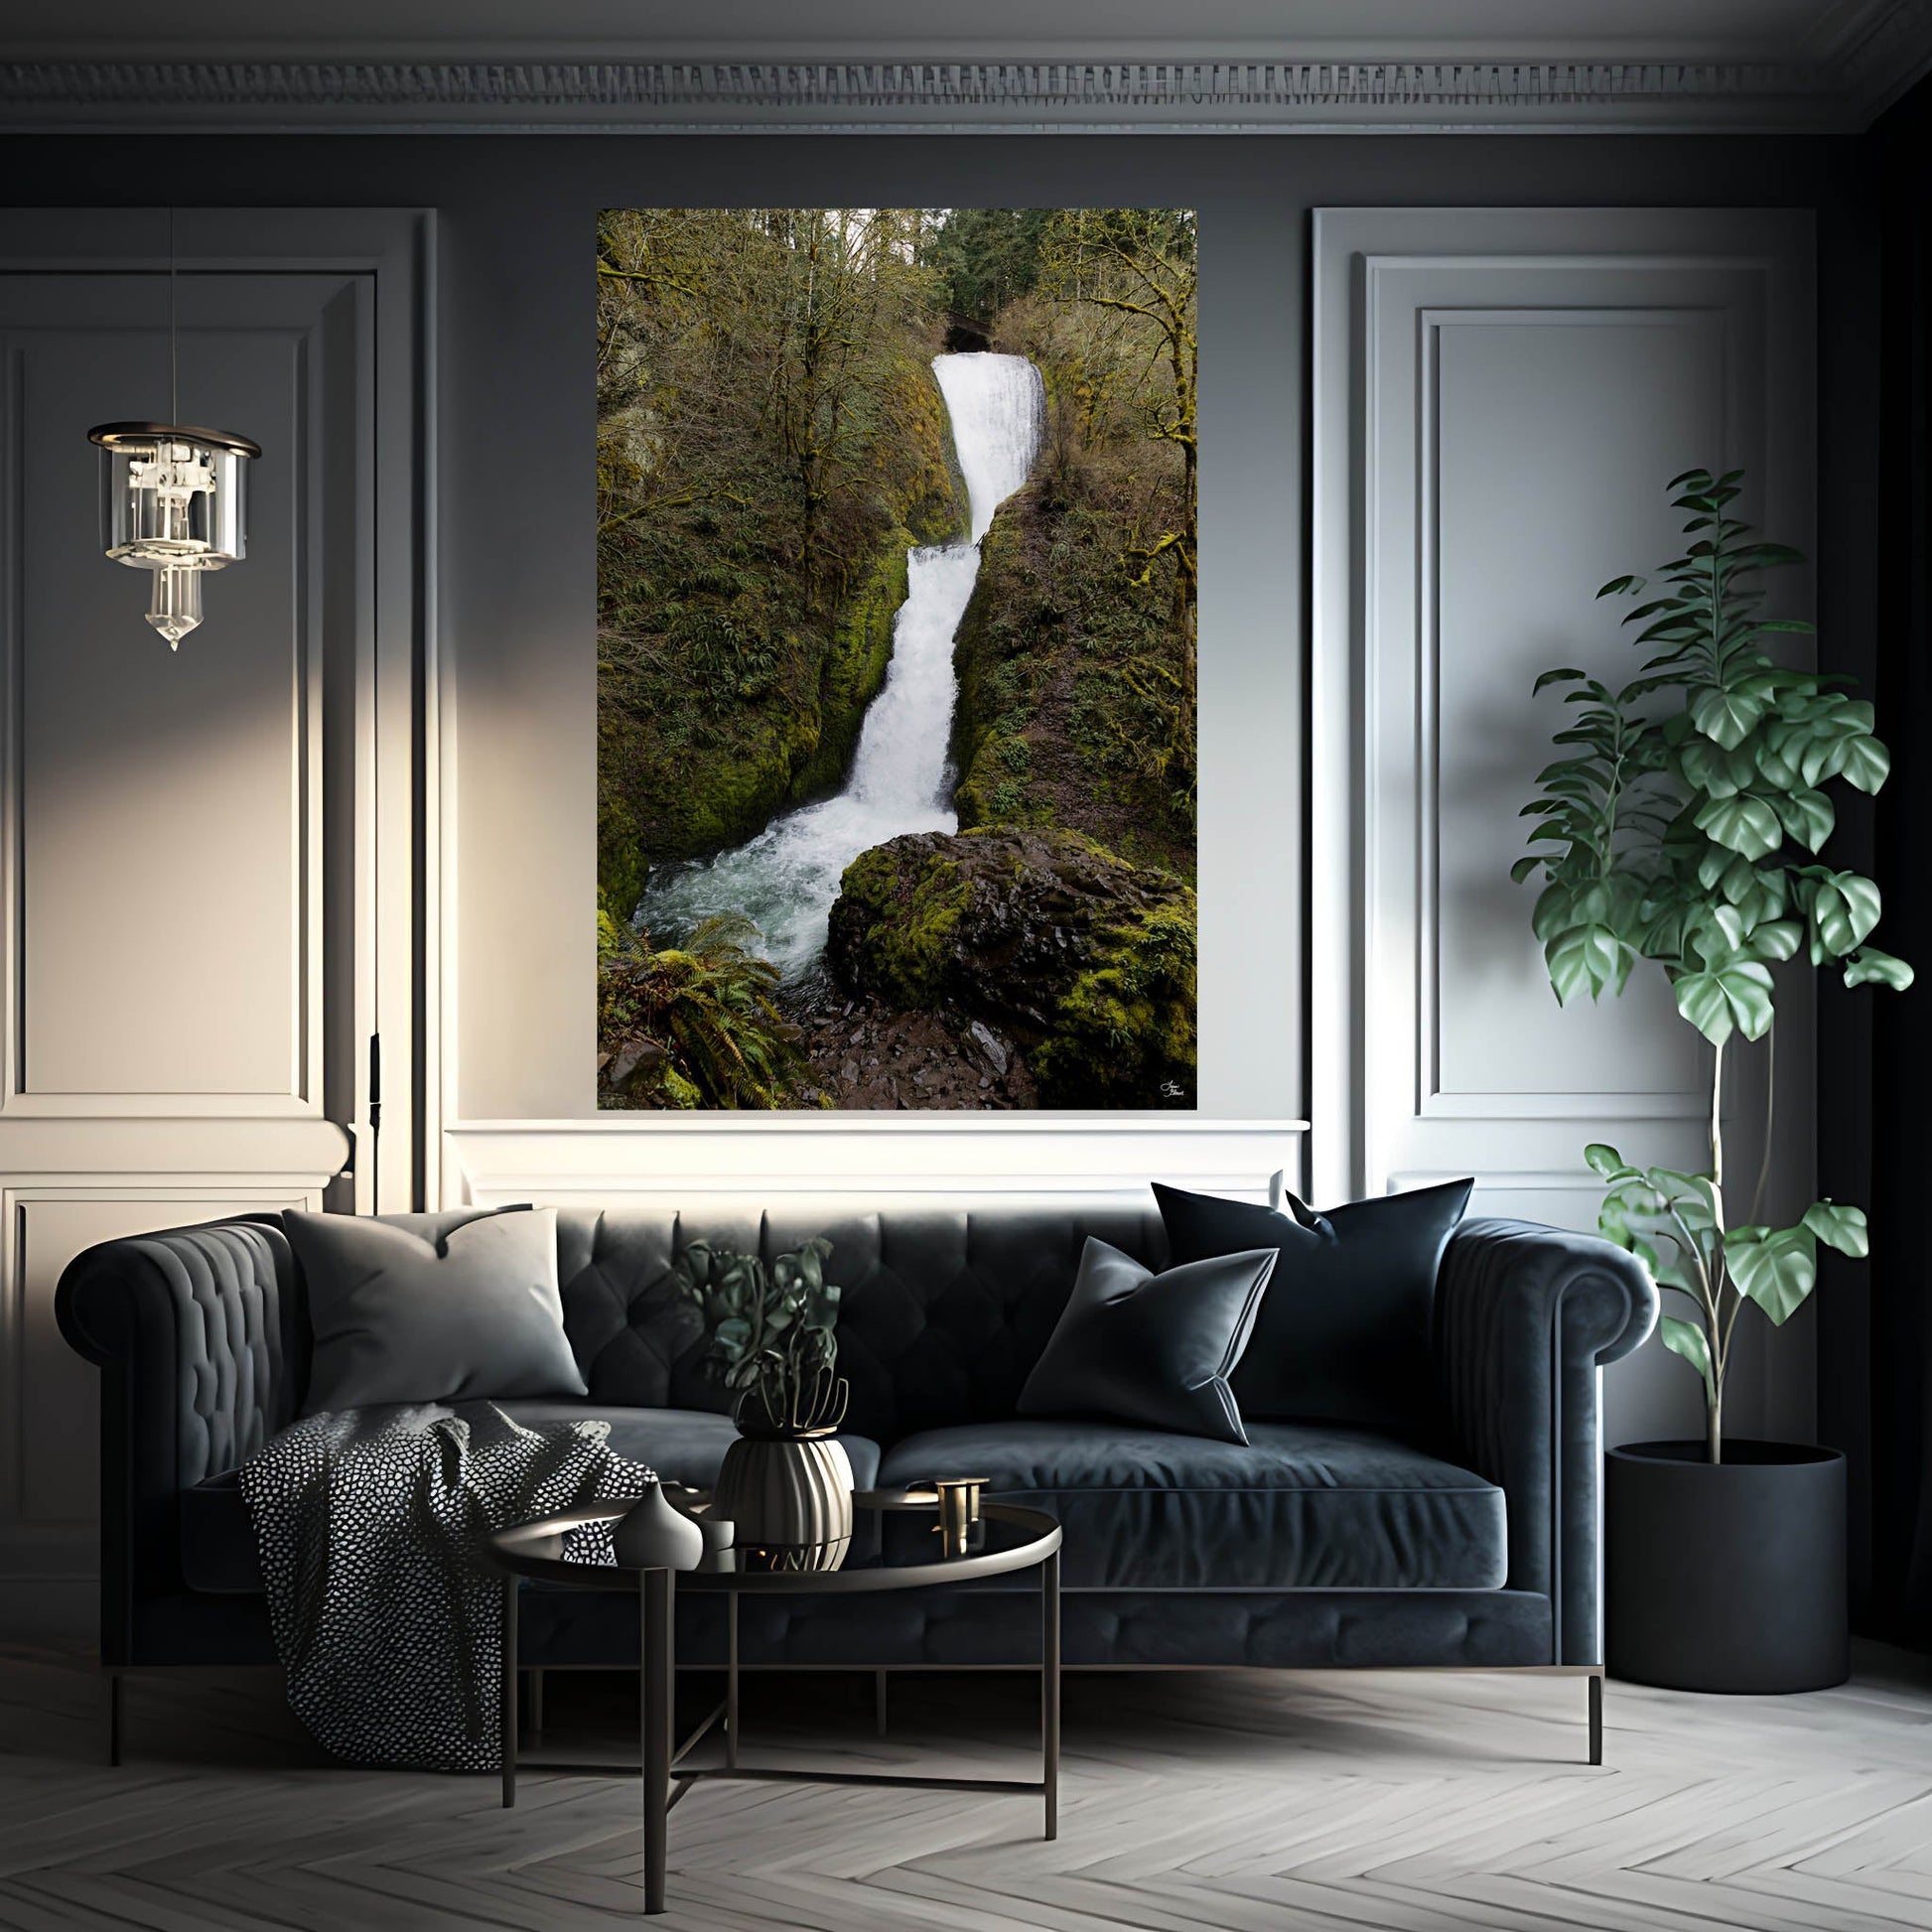 Bridal Veil Falls art hanging above luxury couch in gray room